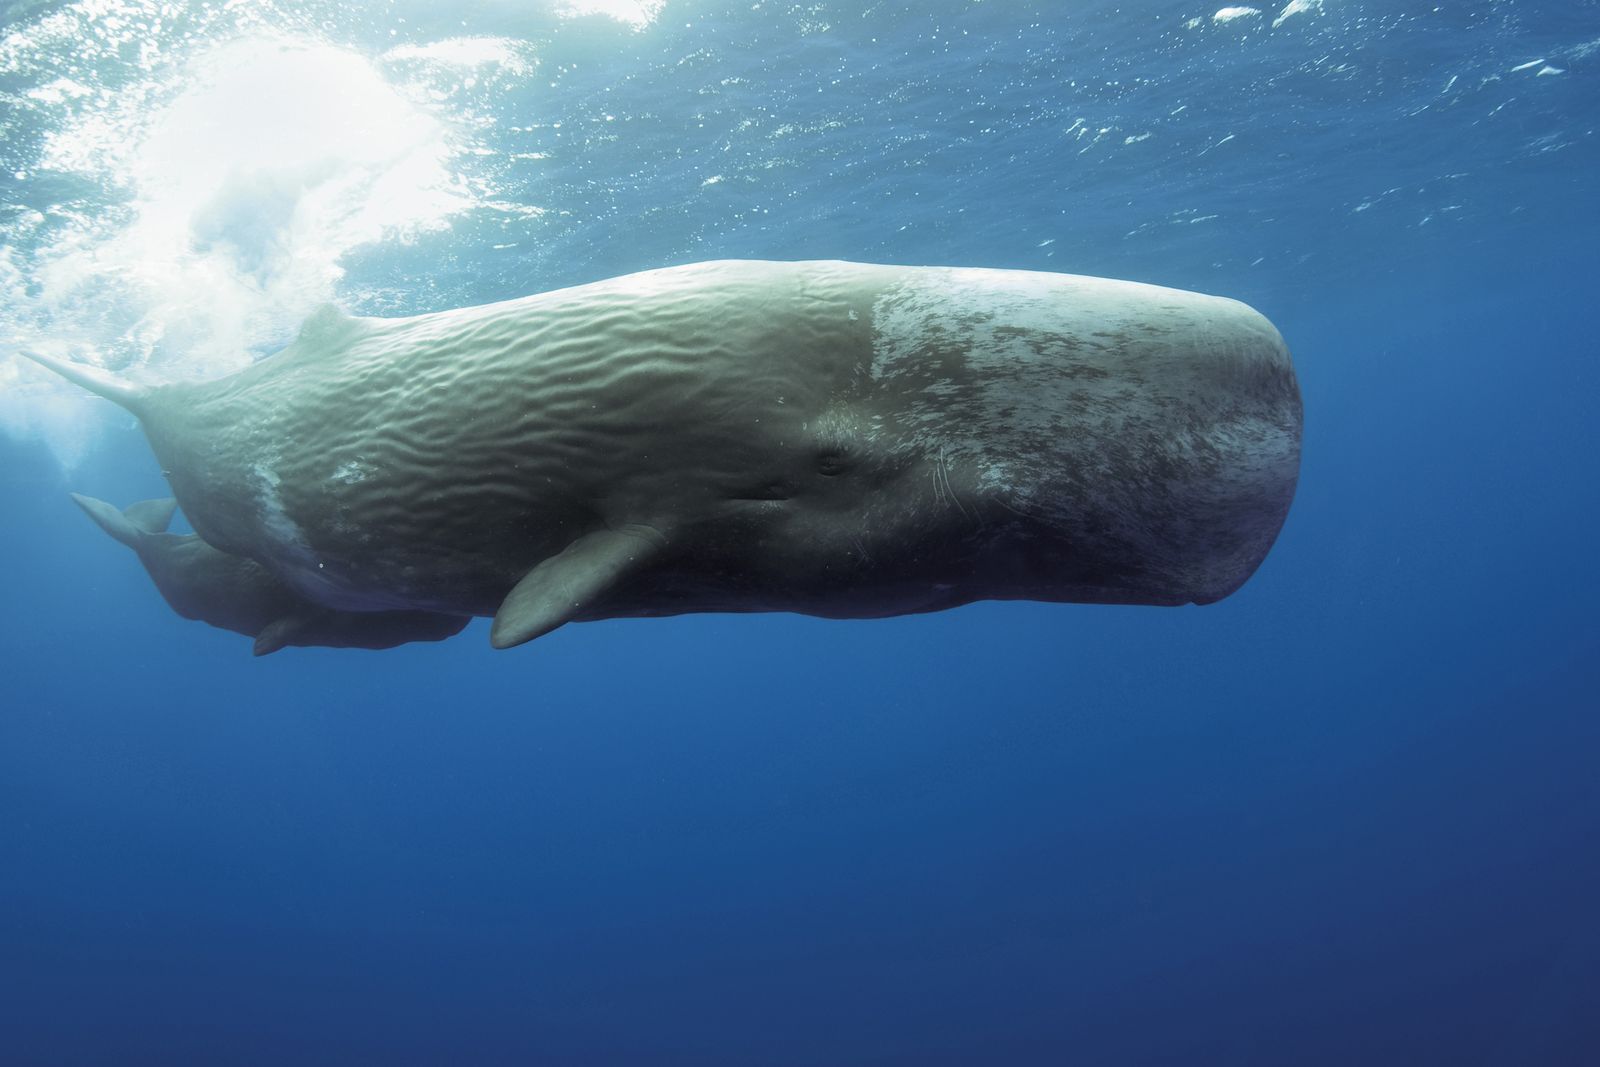 A New Detection System Could Save Sperm Whales From Ship Strikes